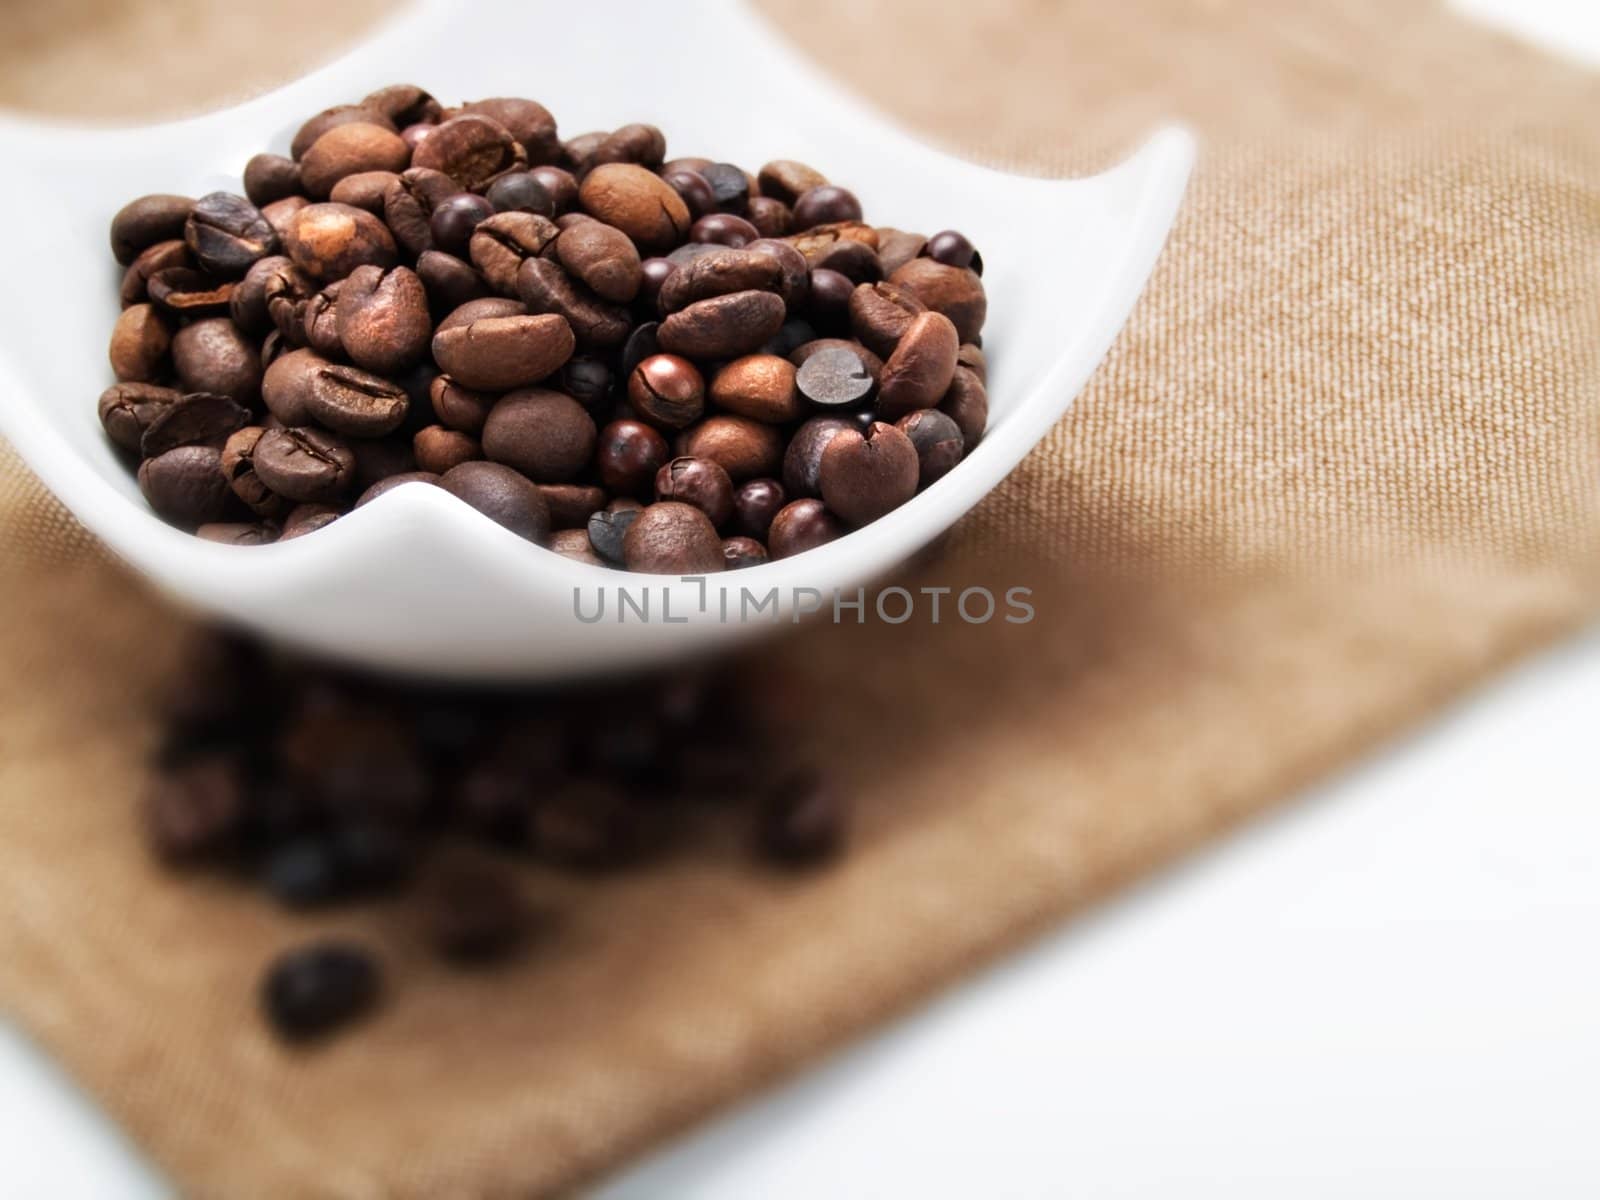 Coffee beans in a white plate